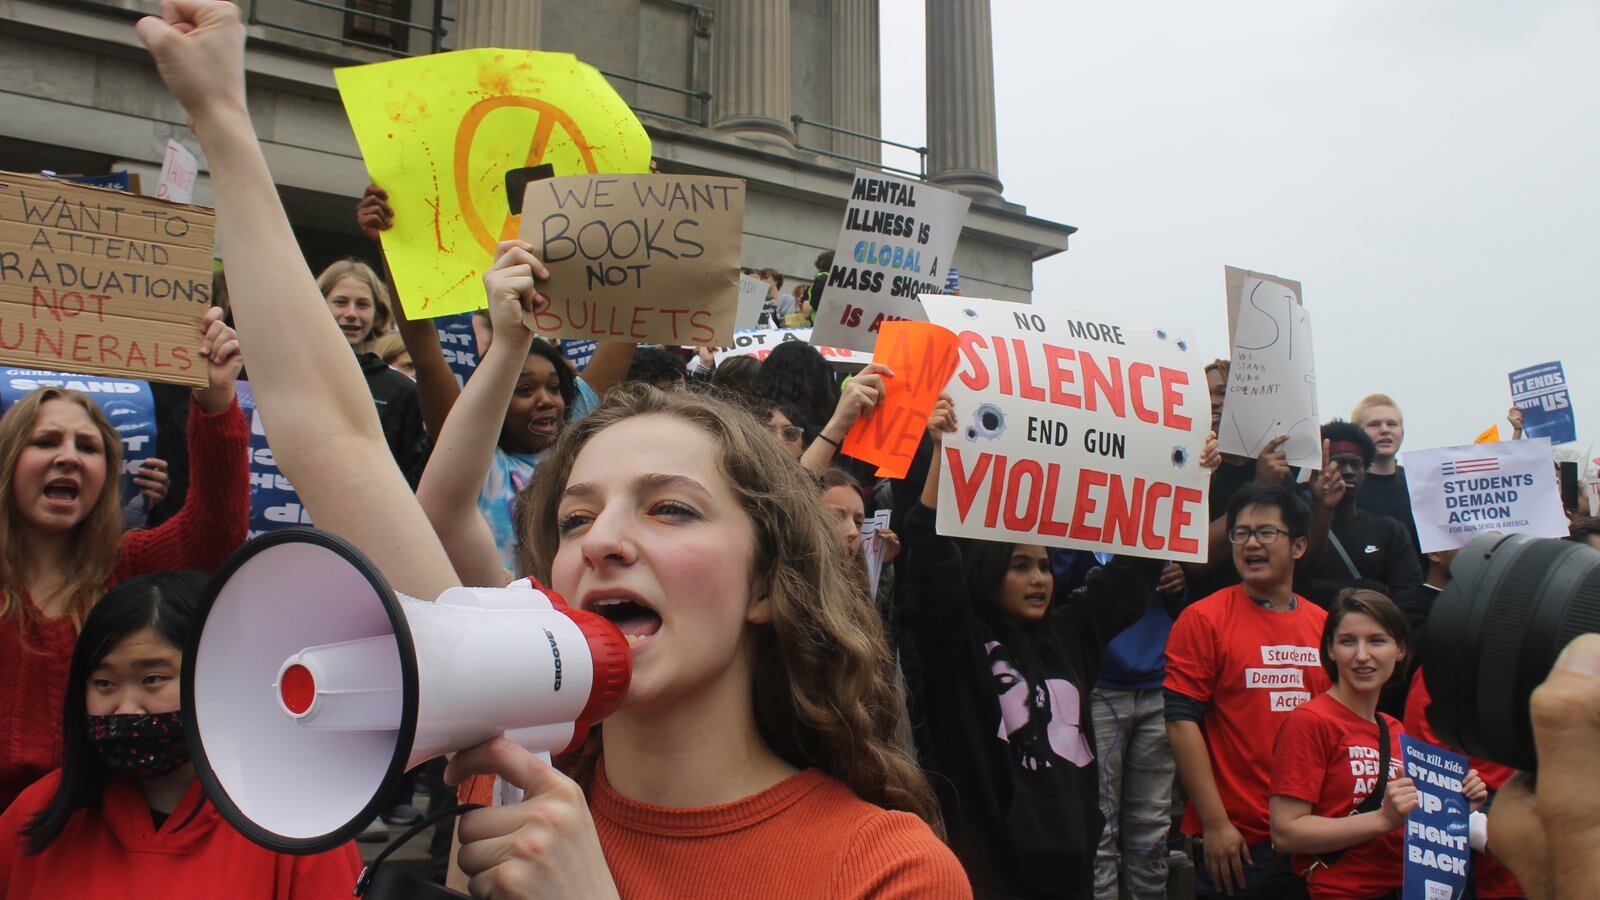 A girl yells into a megaphone surrounded by students holding signs on the steps of a large building.